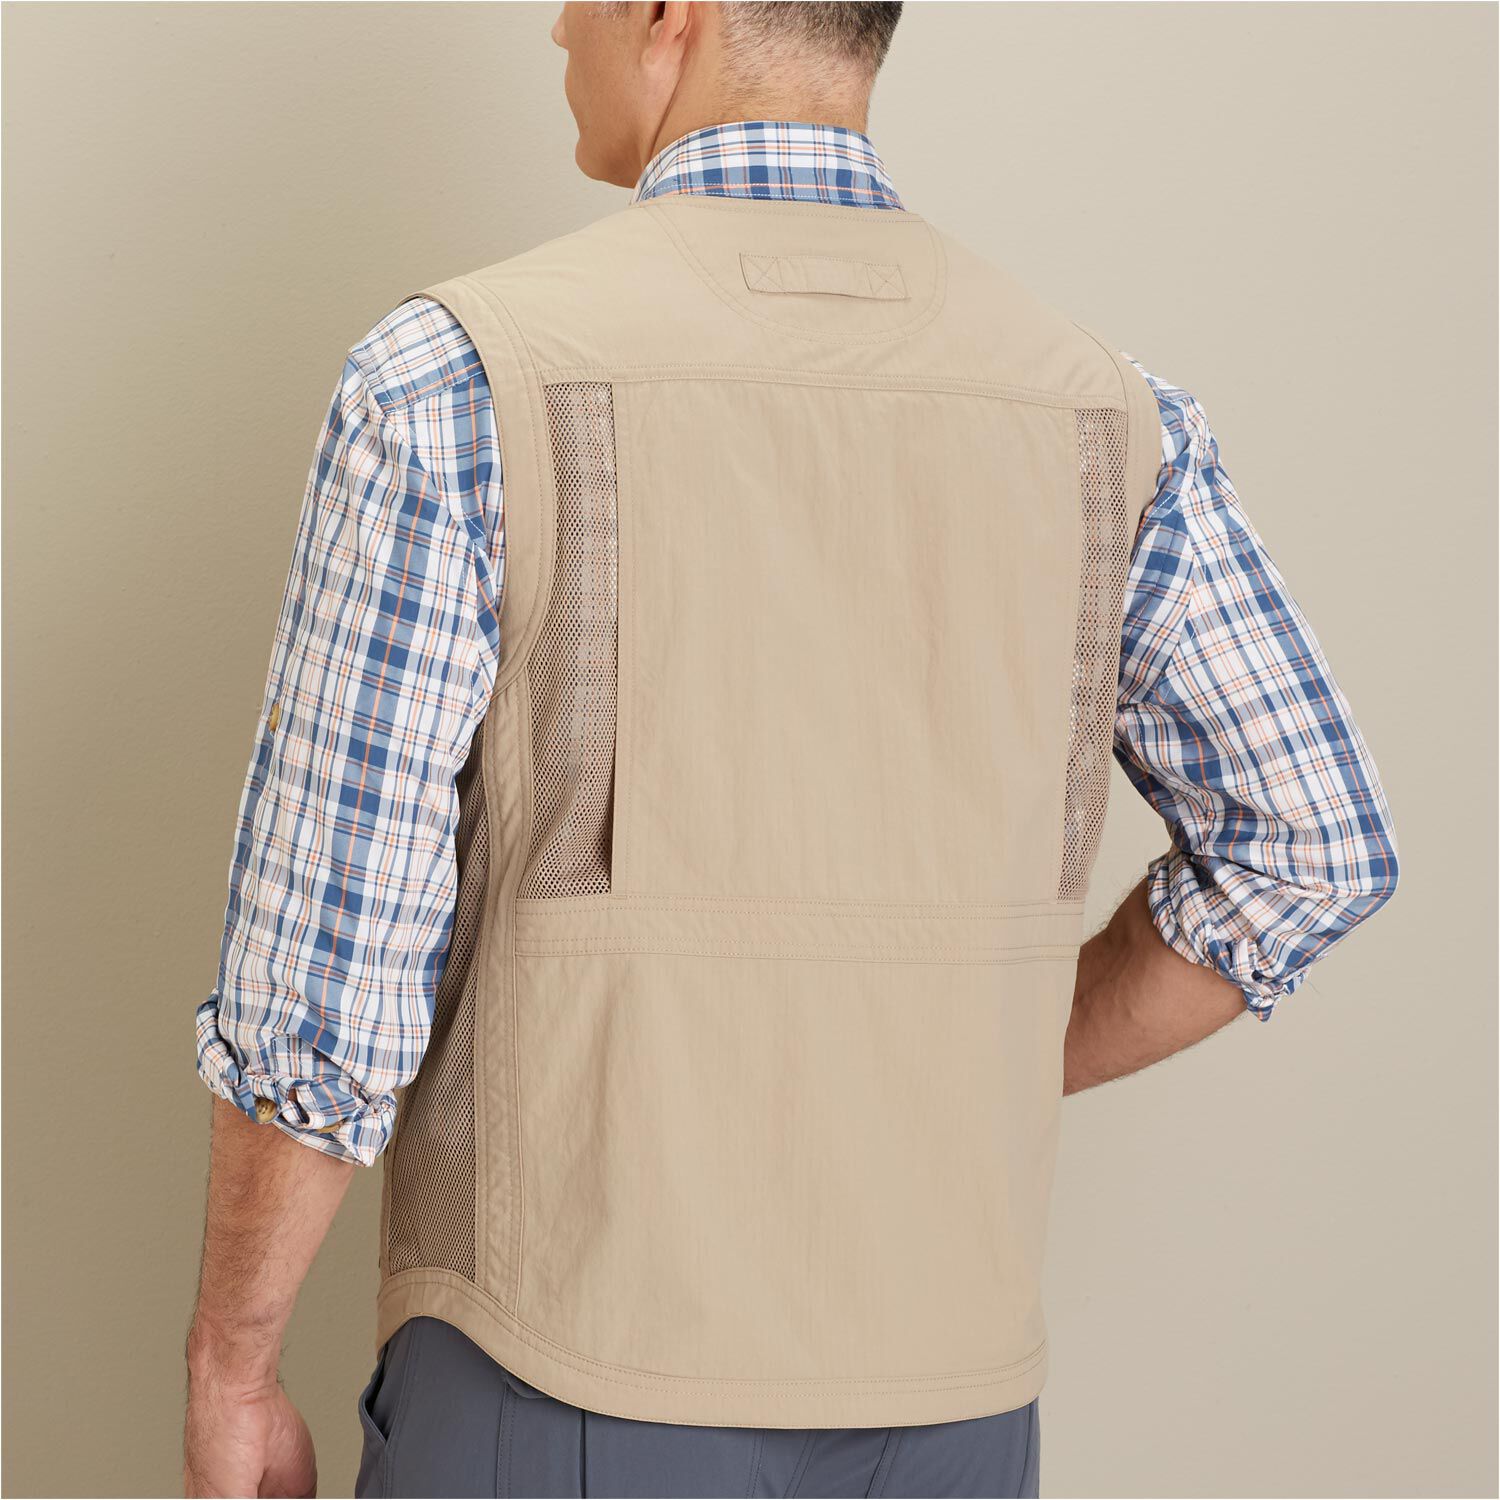 Men's Working Man's Vest | Duluth Trading Company